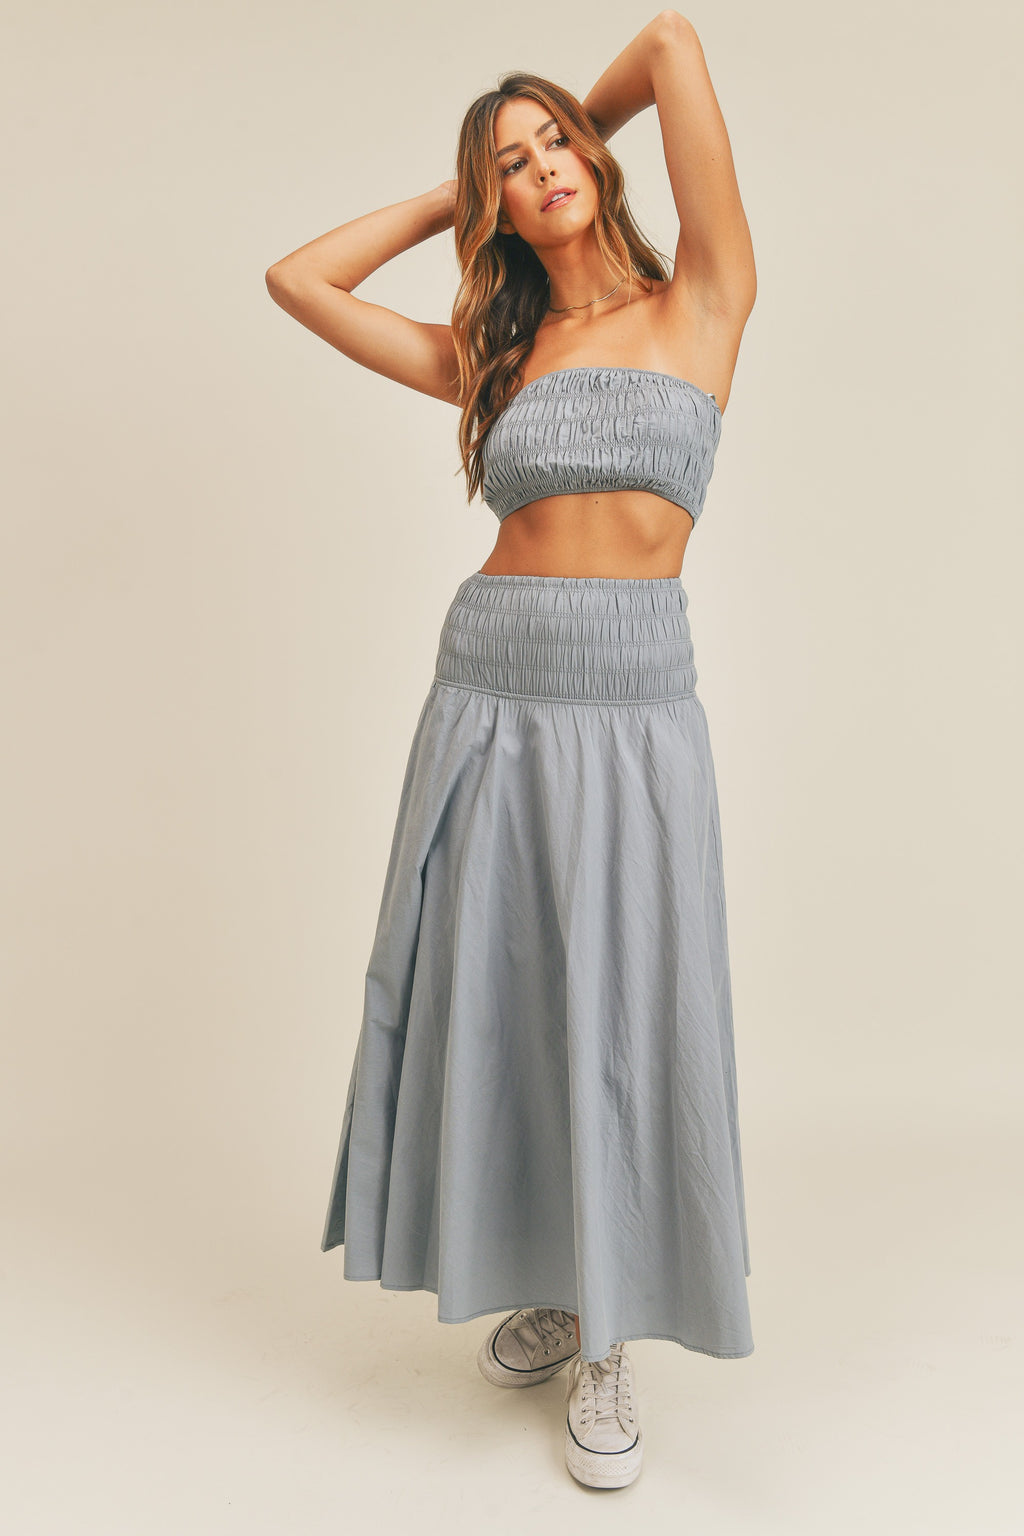 The Heights Two Piece Maxi Skirt Set with Tube Top FINAL SALE